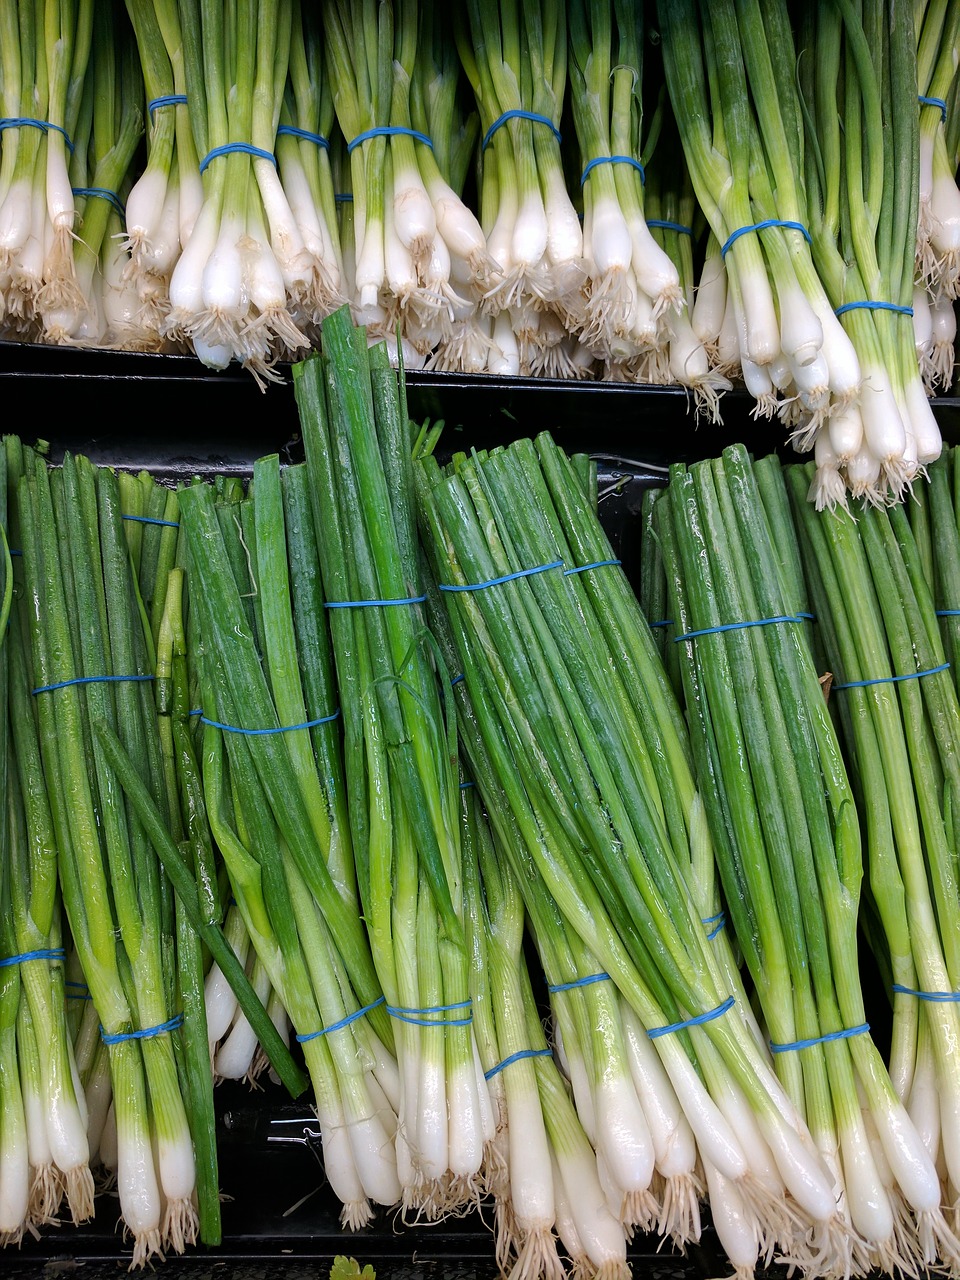 green onions grocery store food free photo